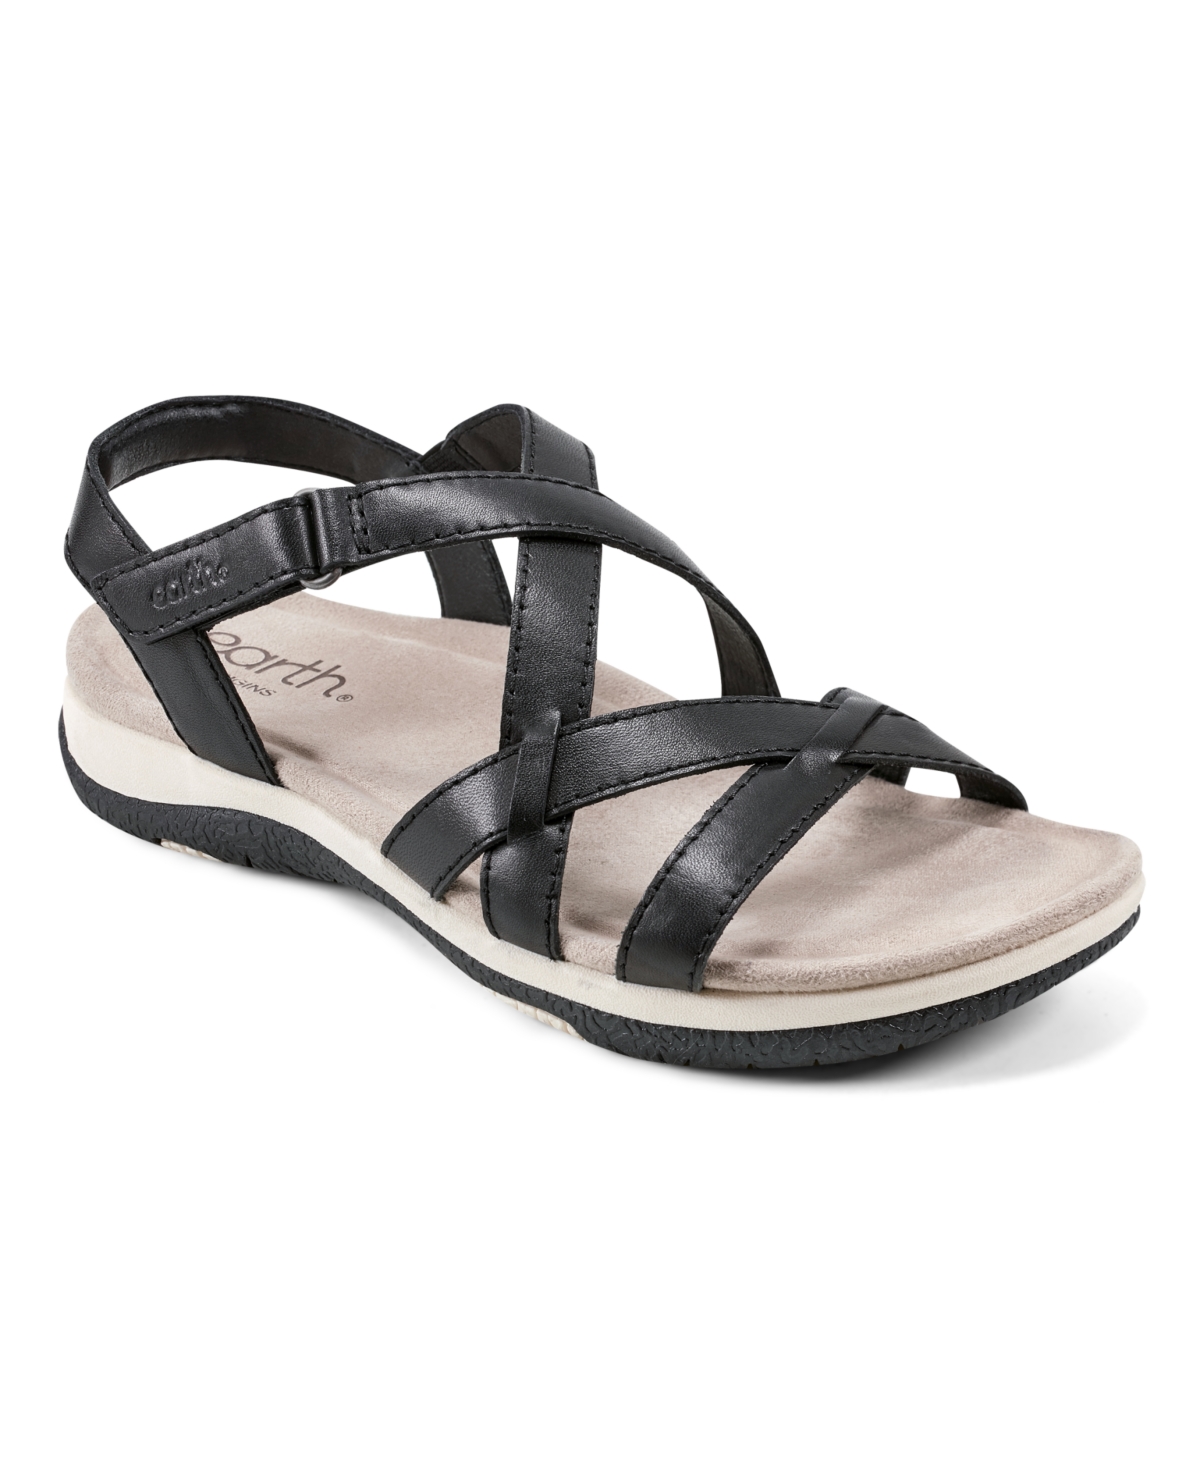 Earth Women's Sterling Strappy Flat Casual Sport Sandals - Light Natural, White Multi Leather